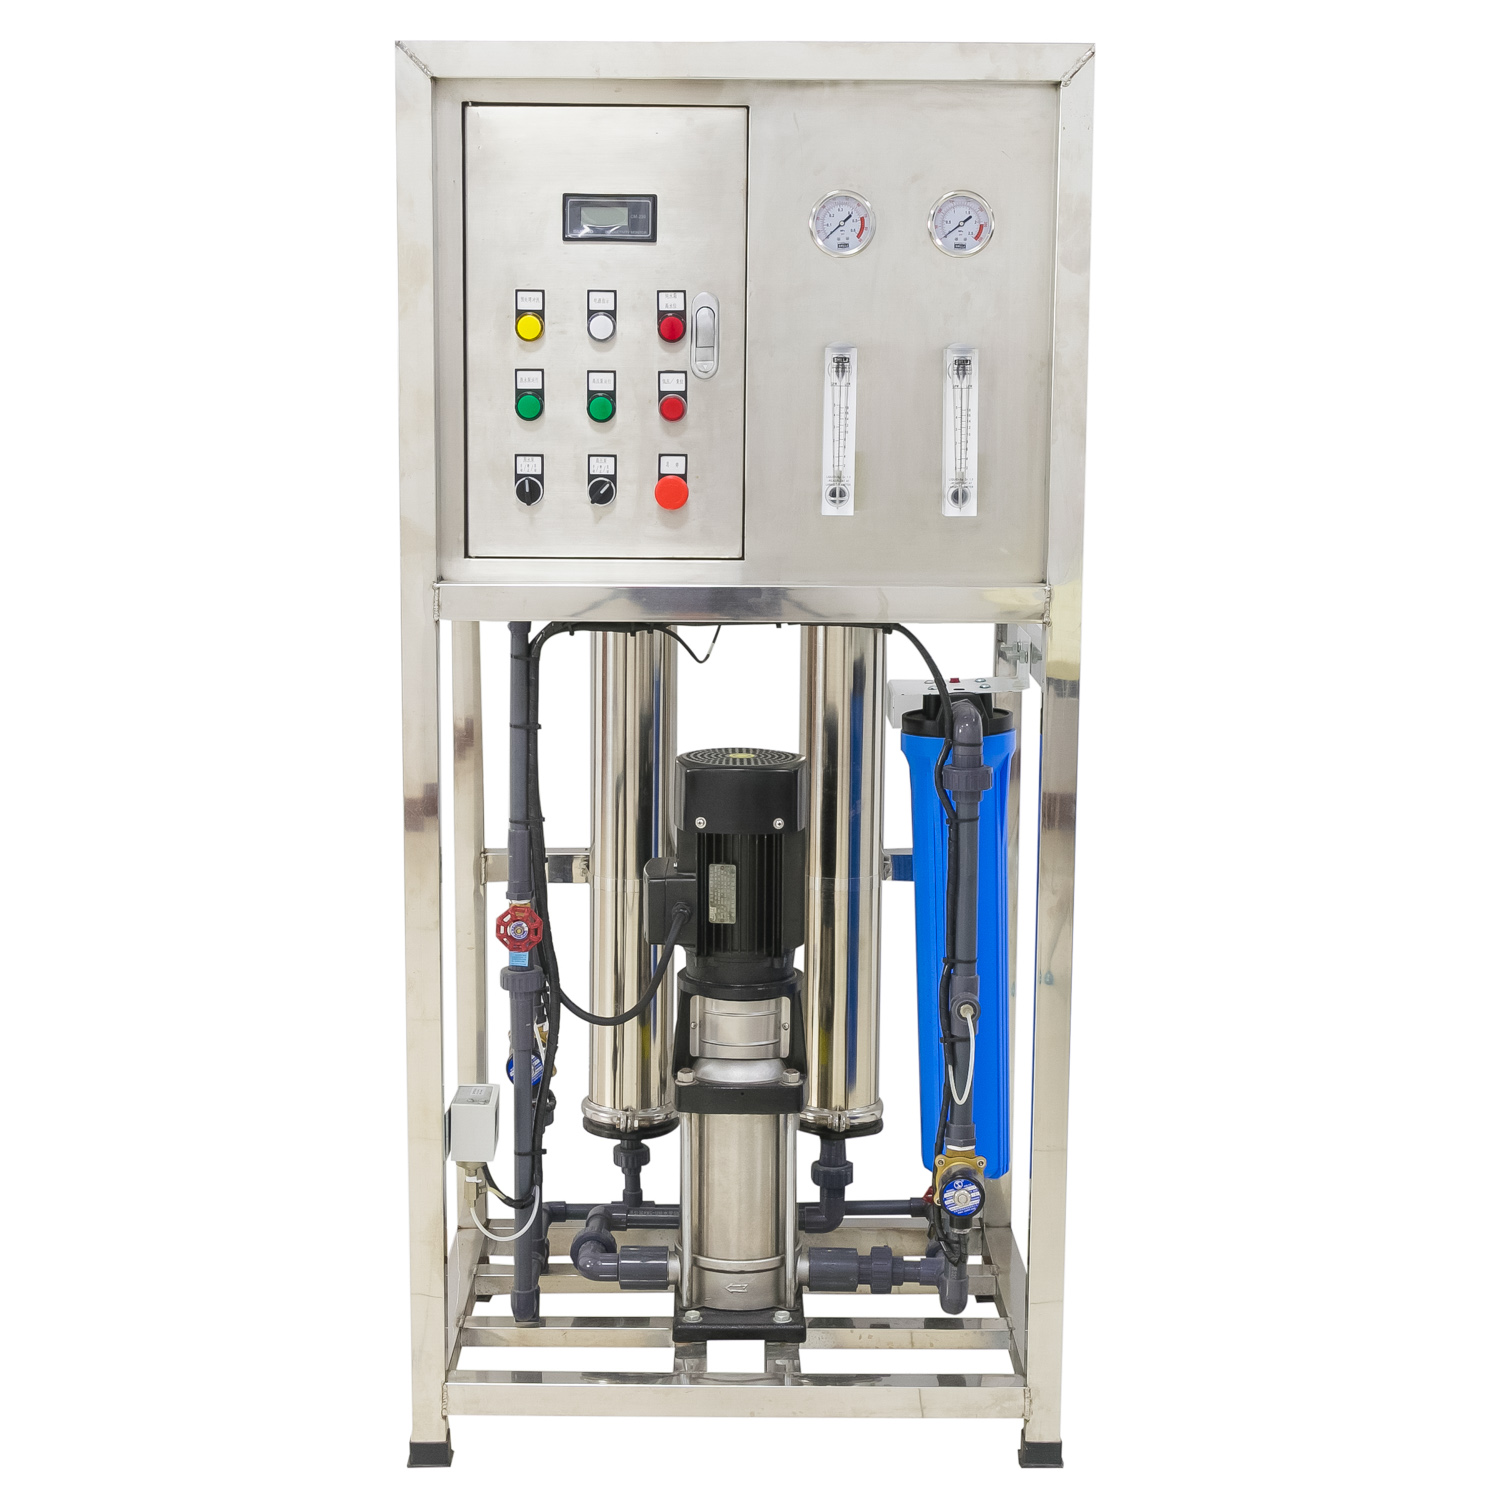 CM RO Water Treatment System 500L/H